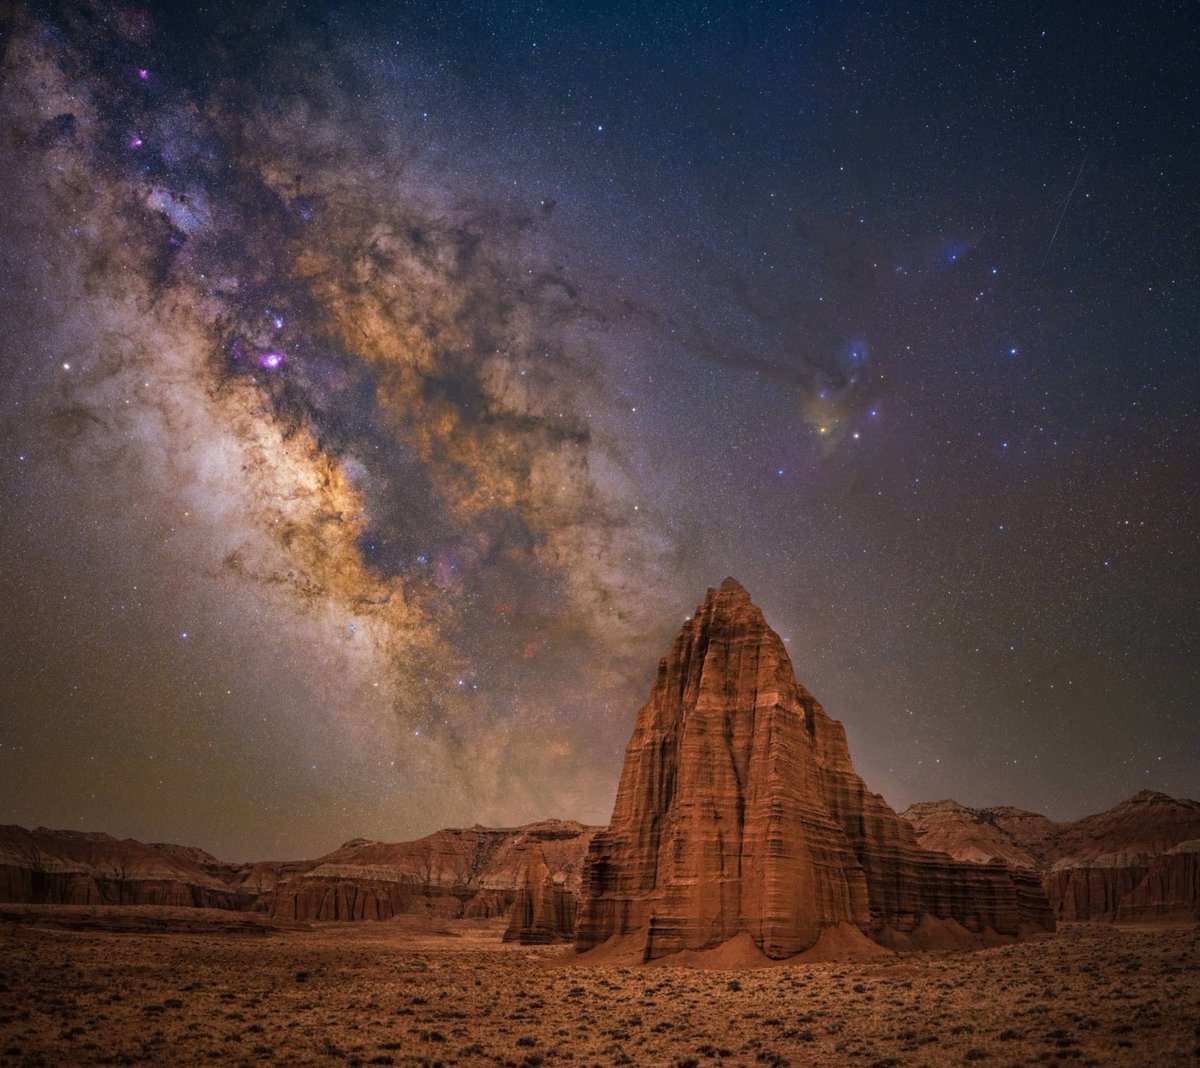 Temple of the Sun / Bryony Richards / Capitol Reef National Park, Utah, USA / Milky Way Photographer of the Year 2021